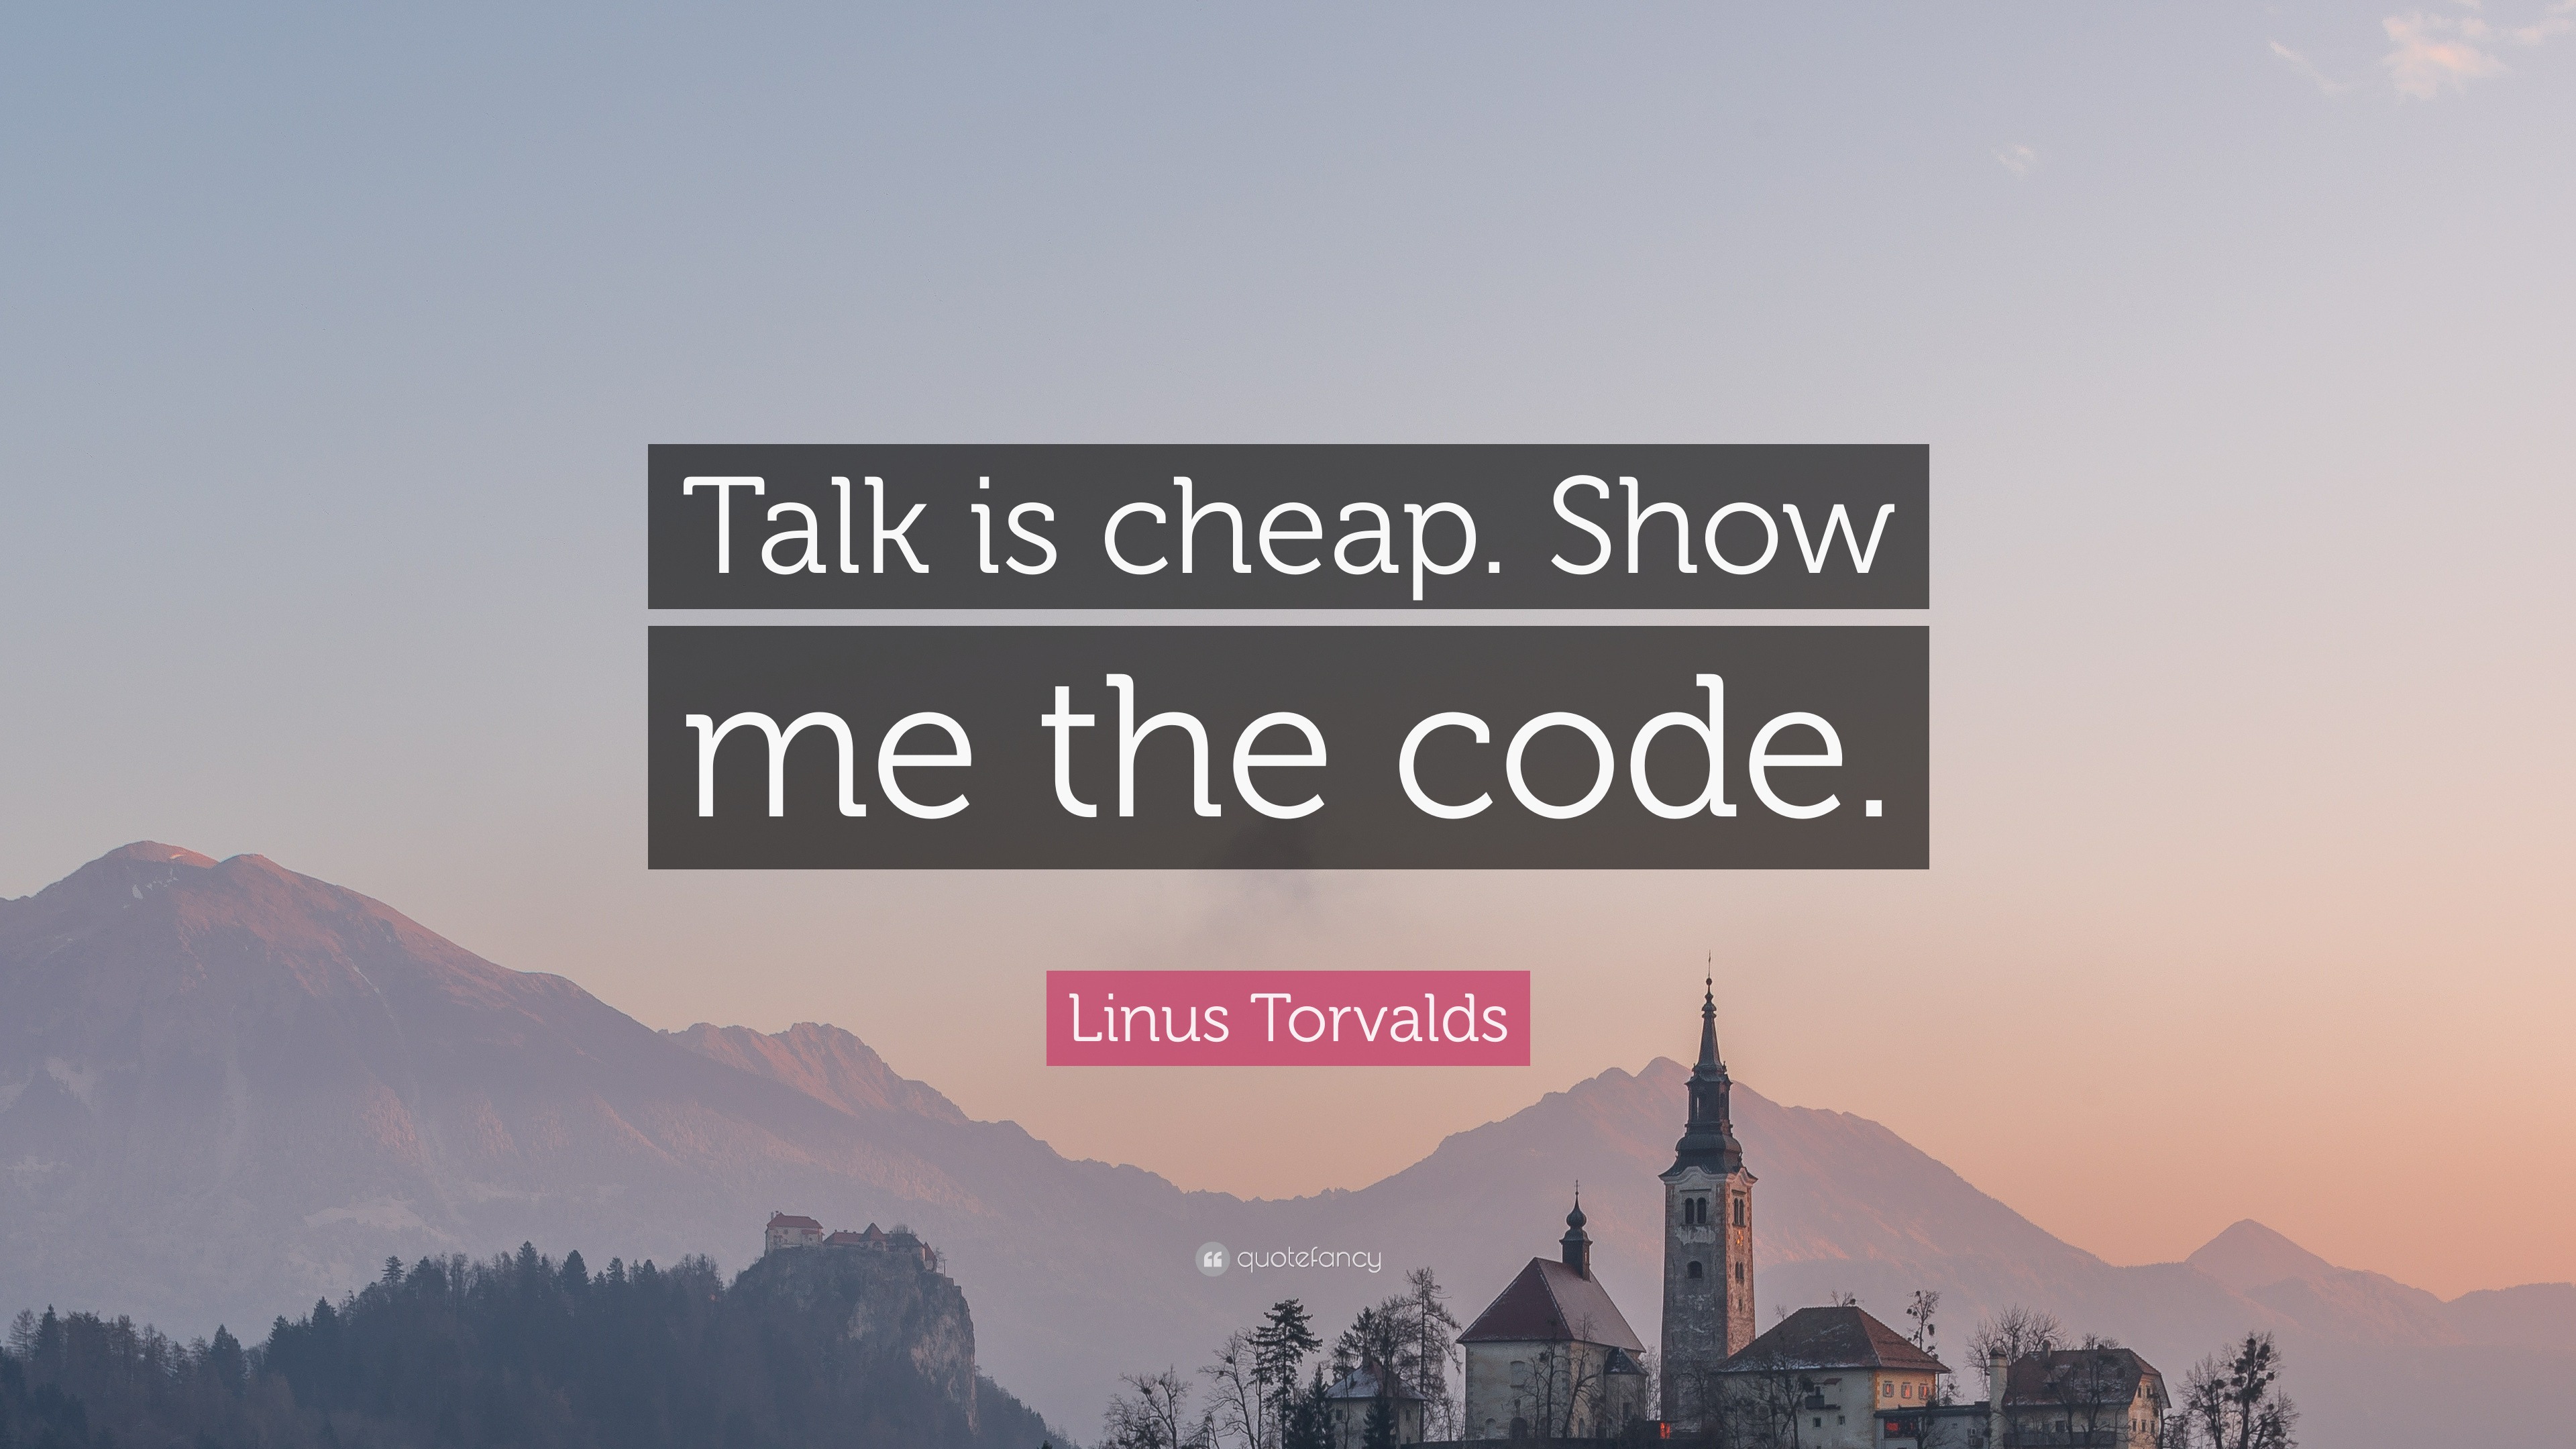 Linus Torvalds Quote: “Talk is cheap. Show me the code.” (14 wallpapers) - Quotefancy